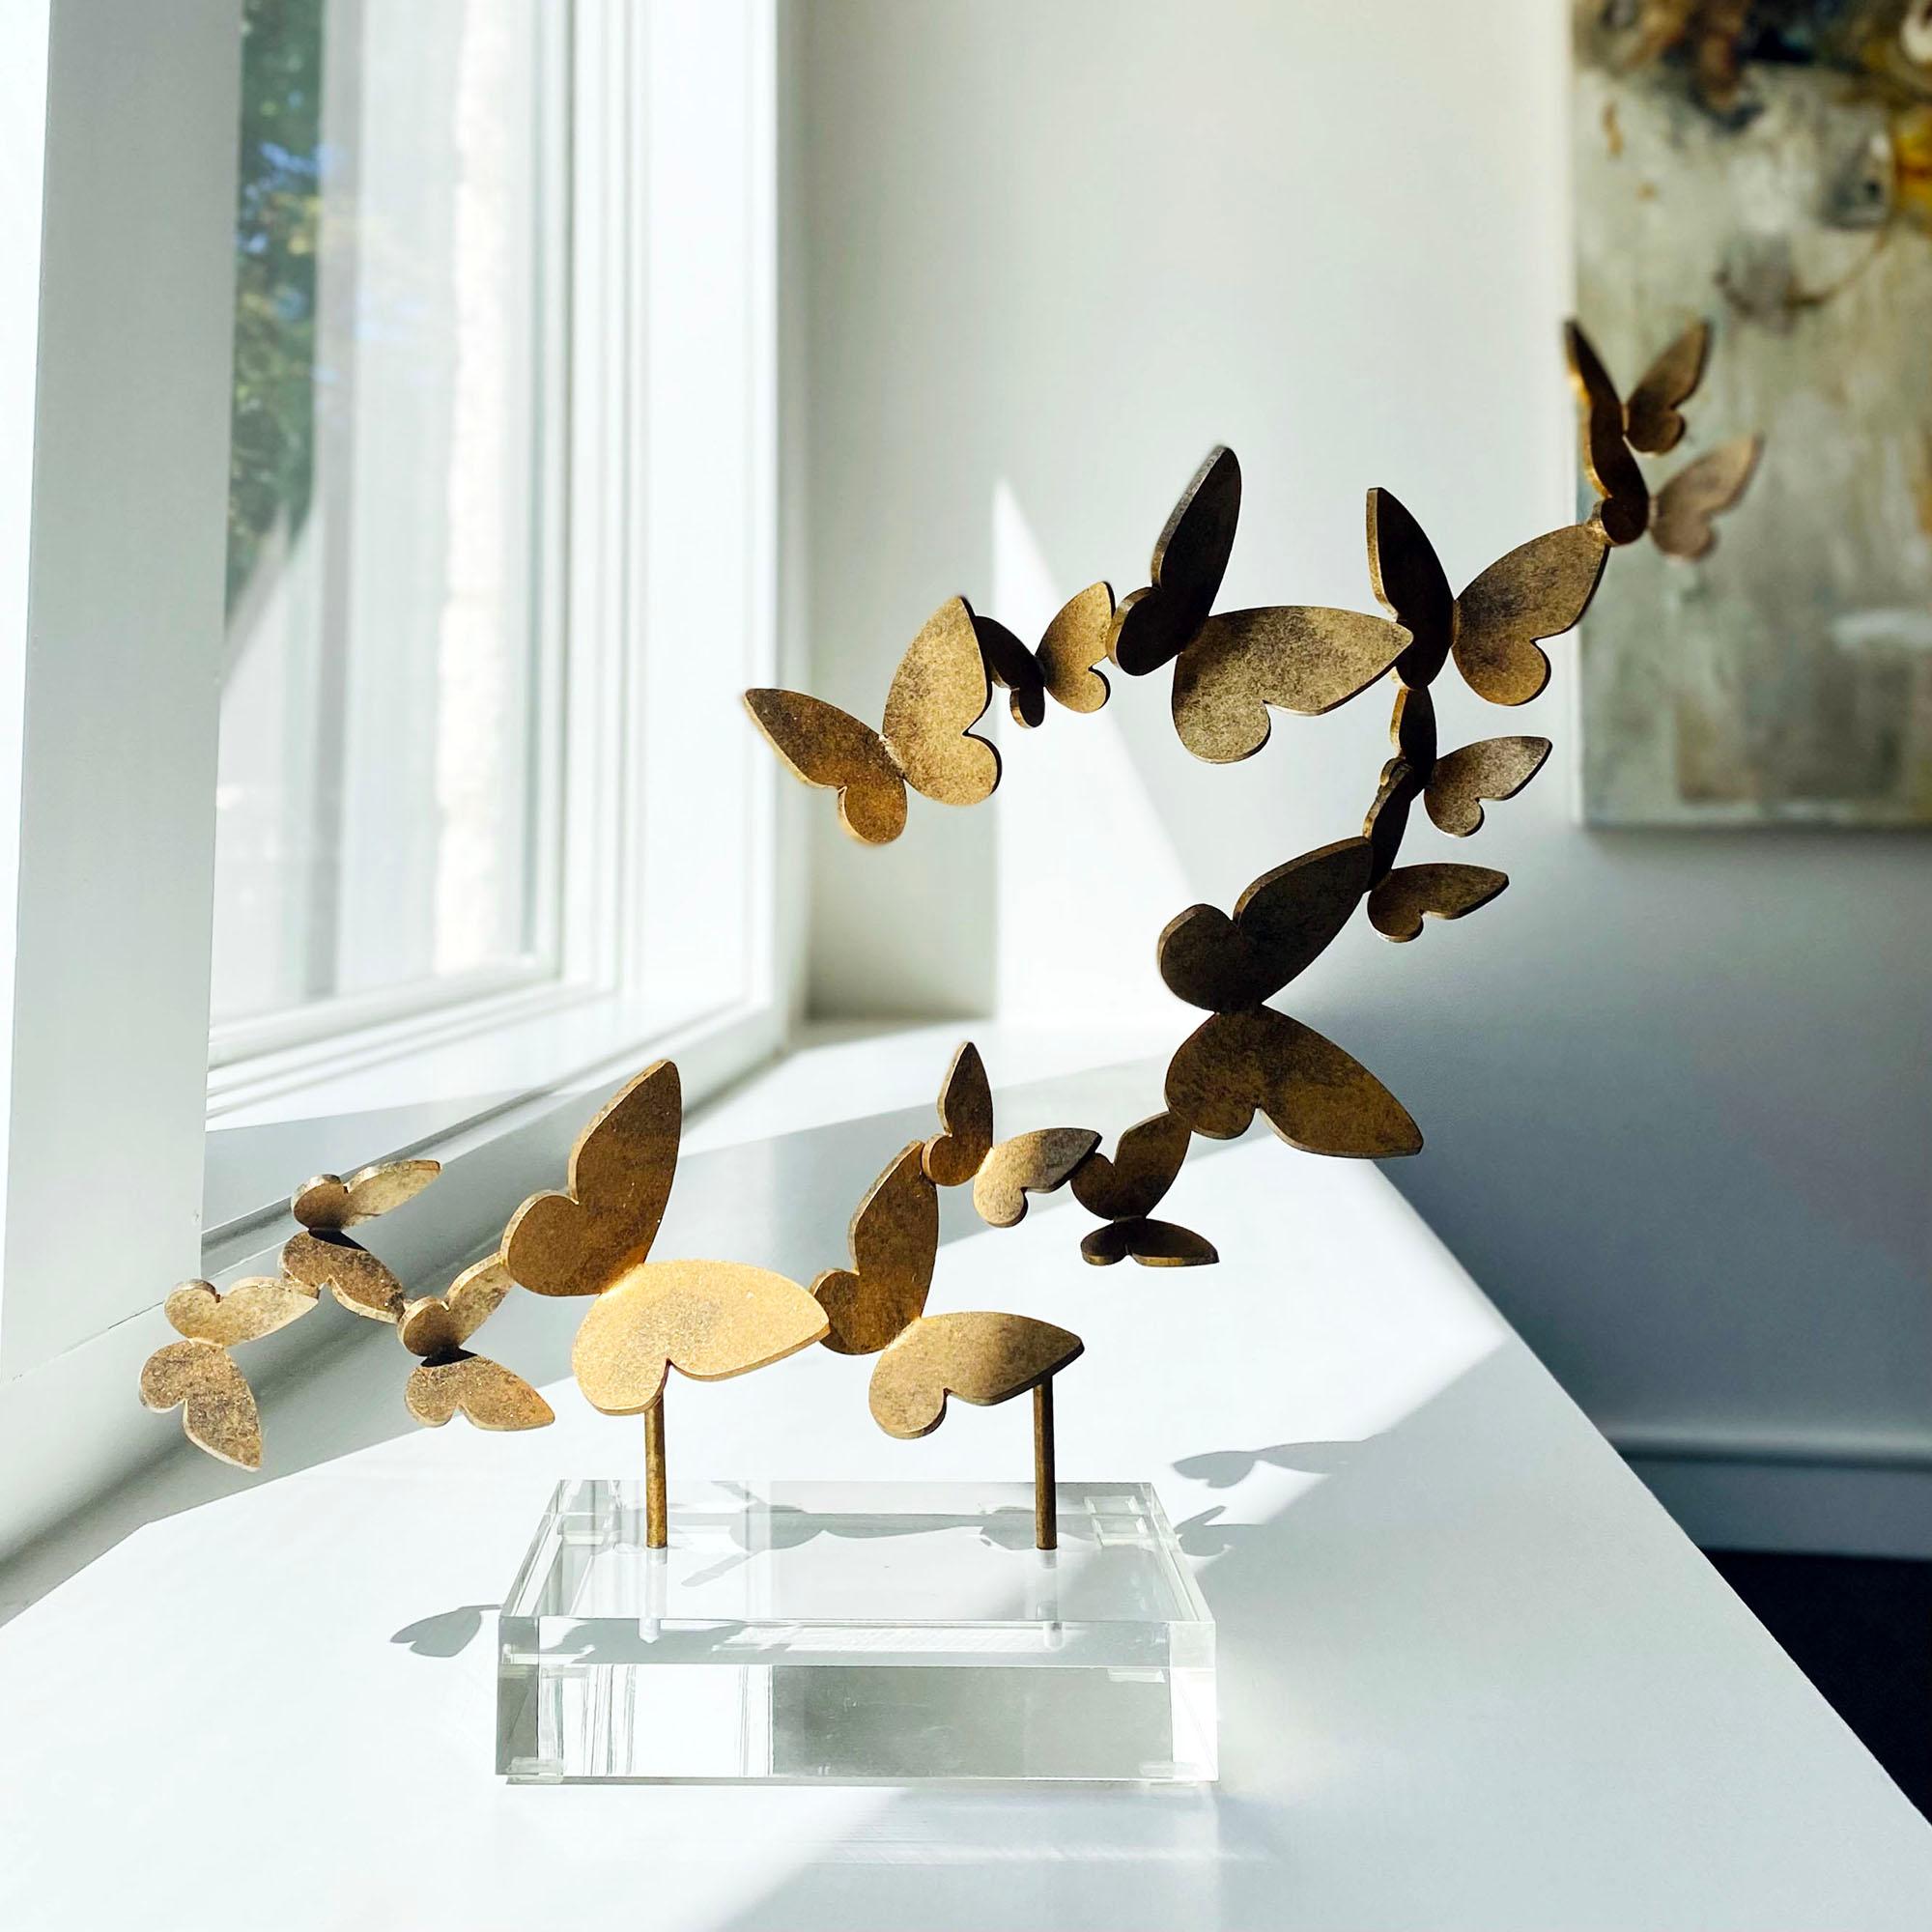 Play up your flirty, fluttery side with this butterfly decorative accessory.  Each flutter, mounted on acrylic, adds movement and joy wherever it lands. Build a space where you can bliss out among the elegance of nature.